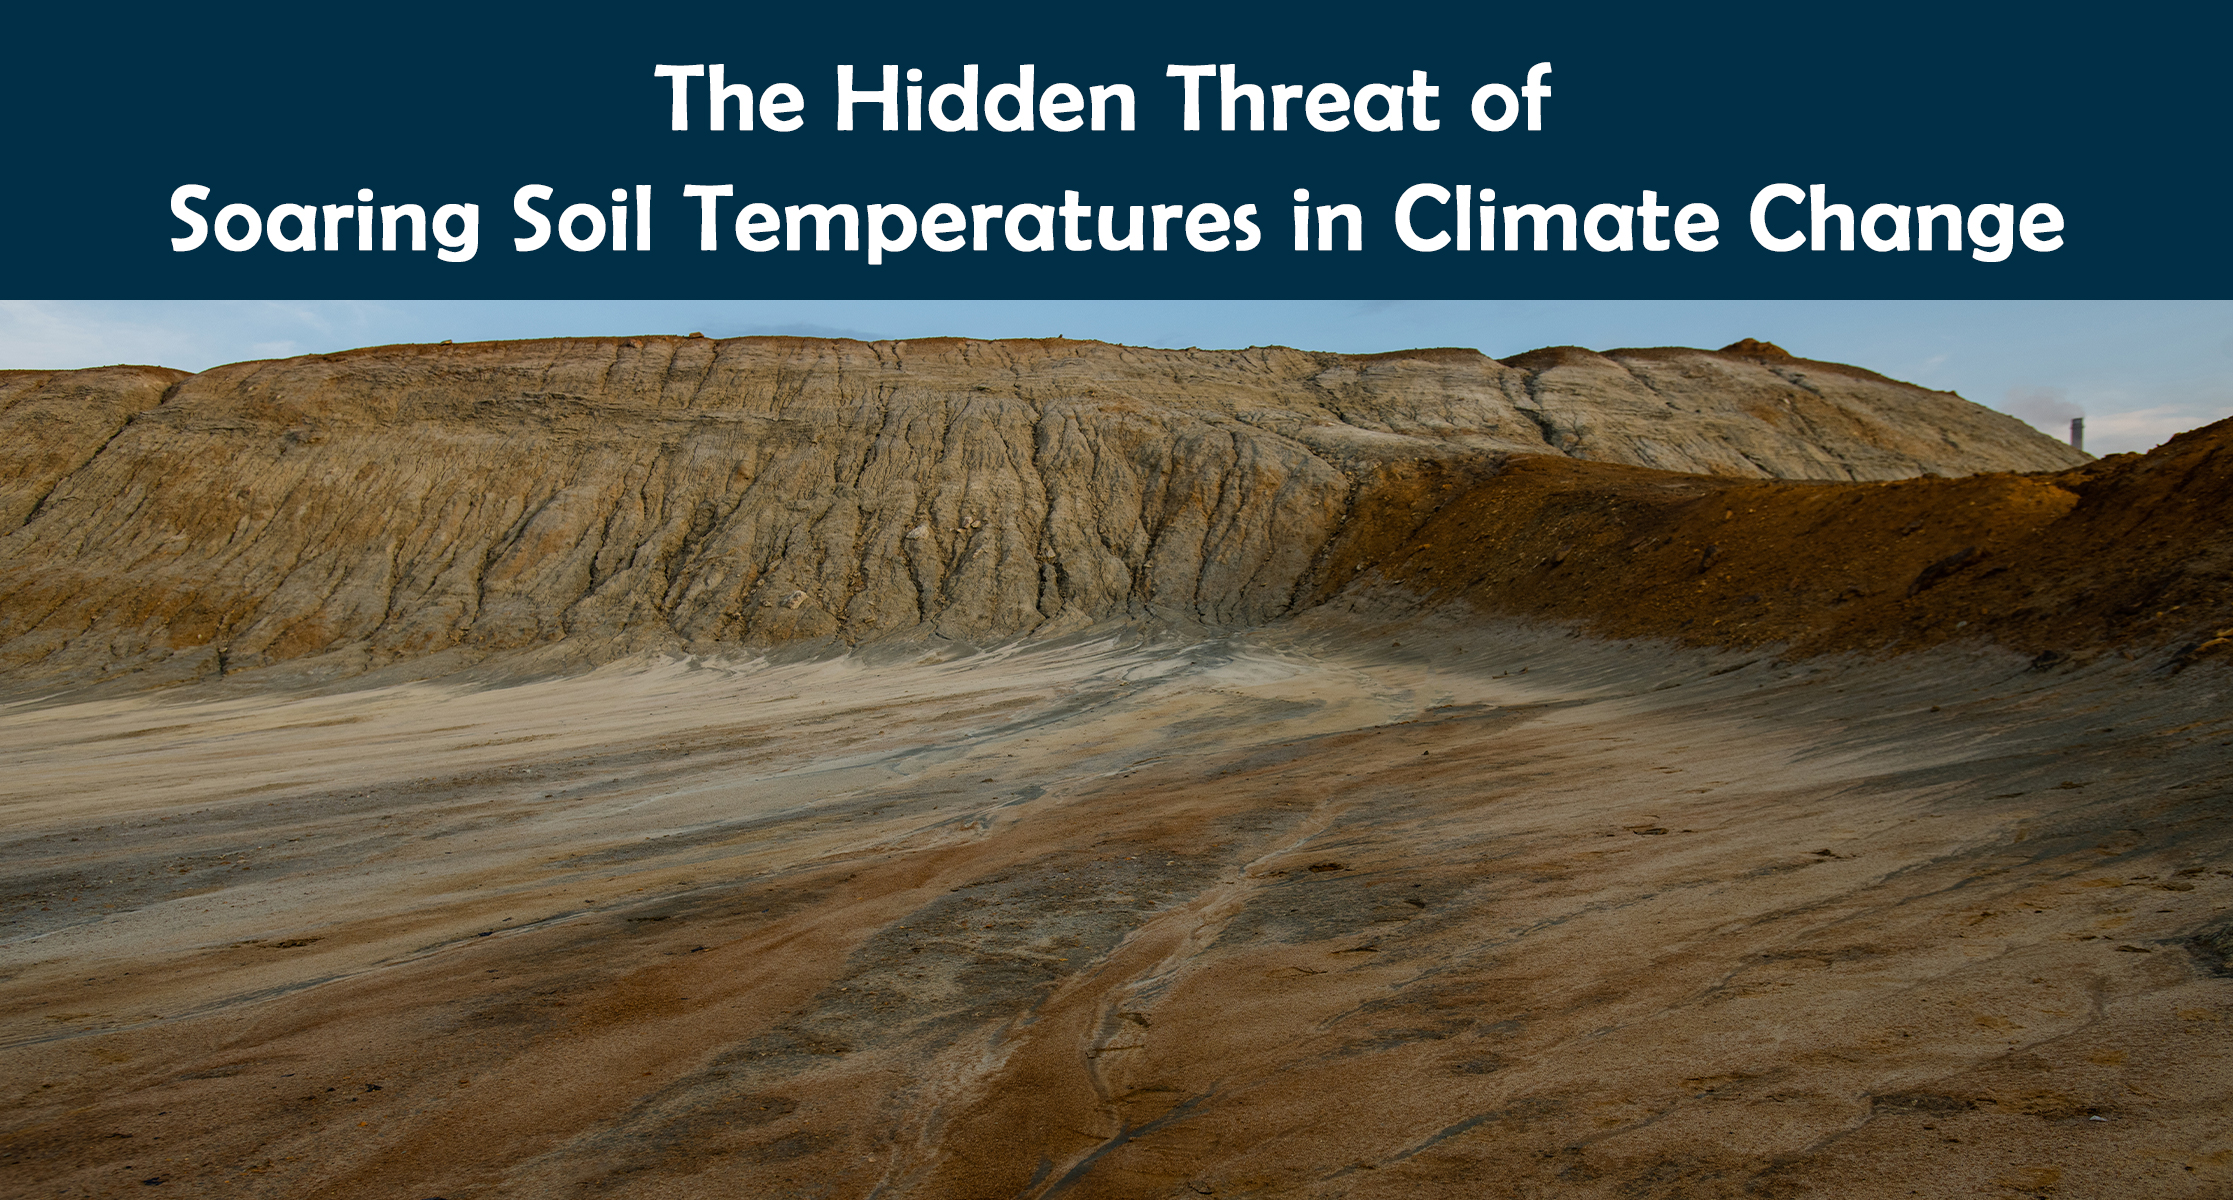 The Hidden Threat of Soaring Soil Temperatures in Climate Change